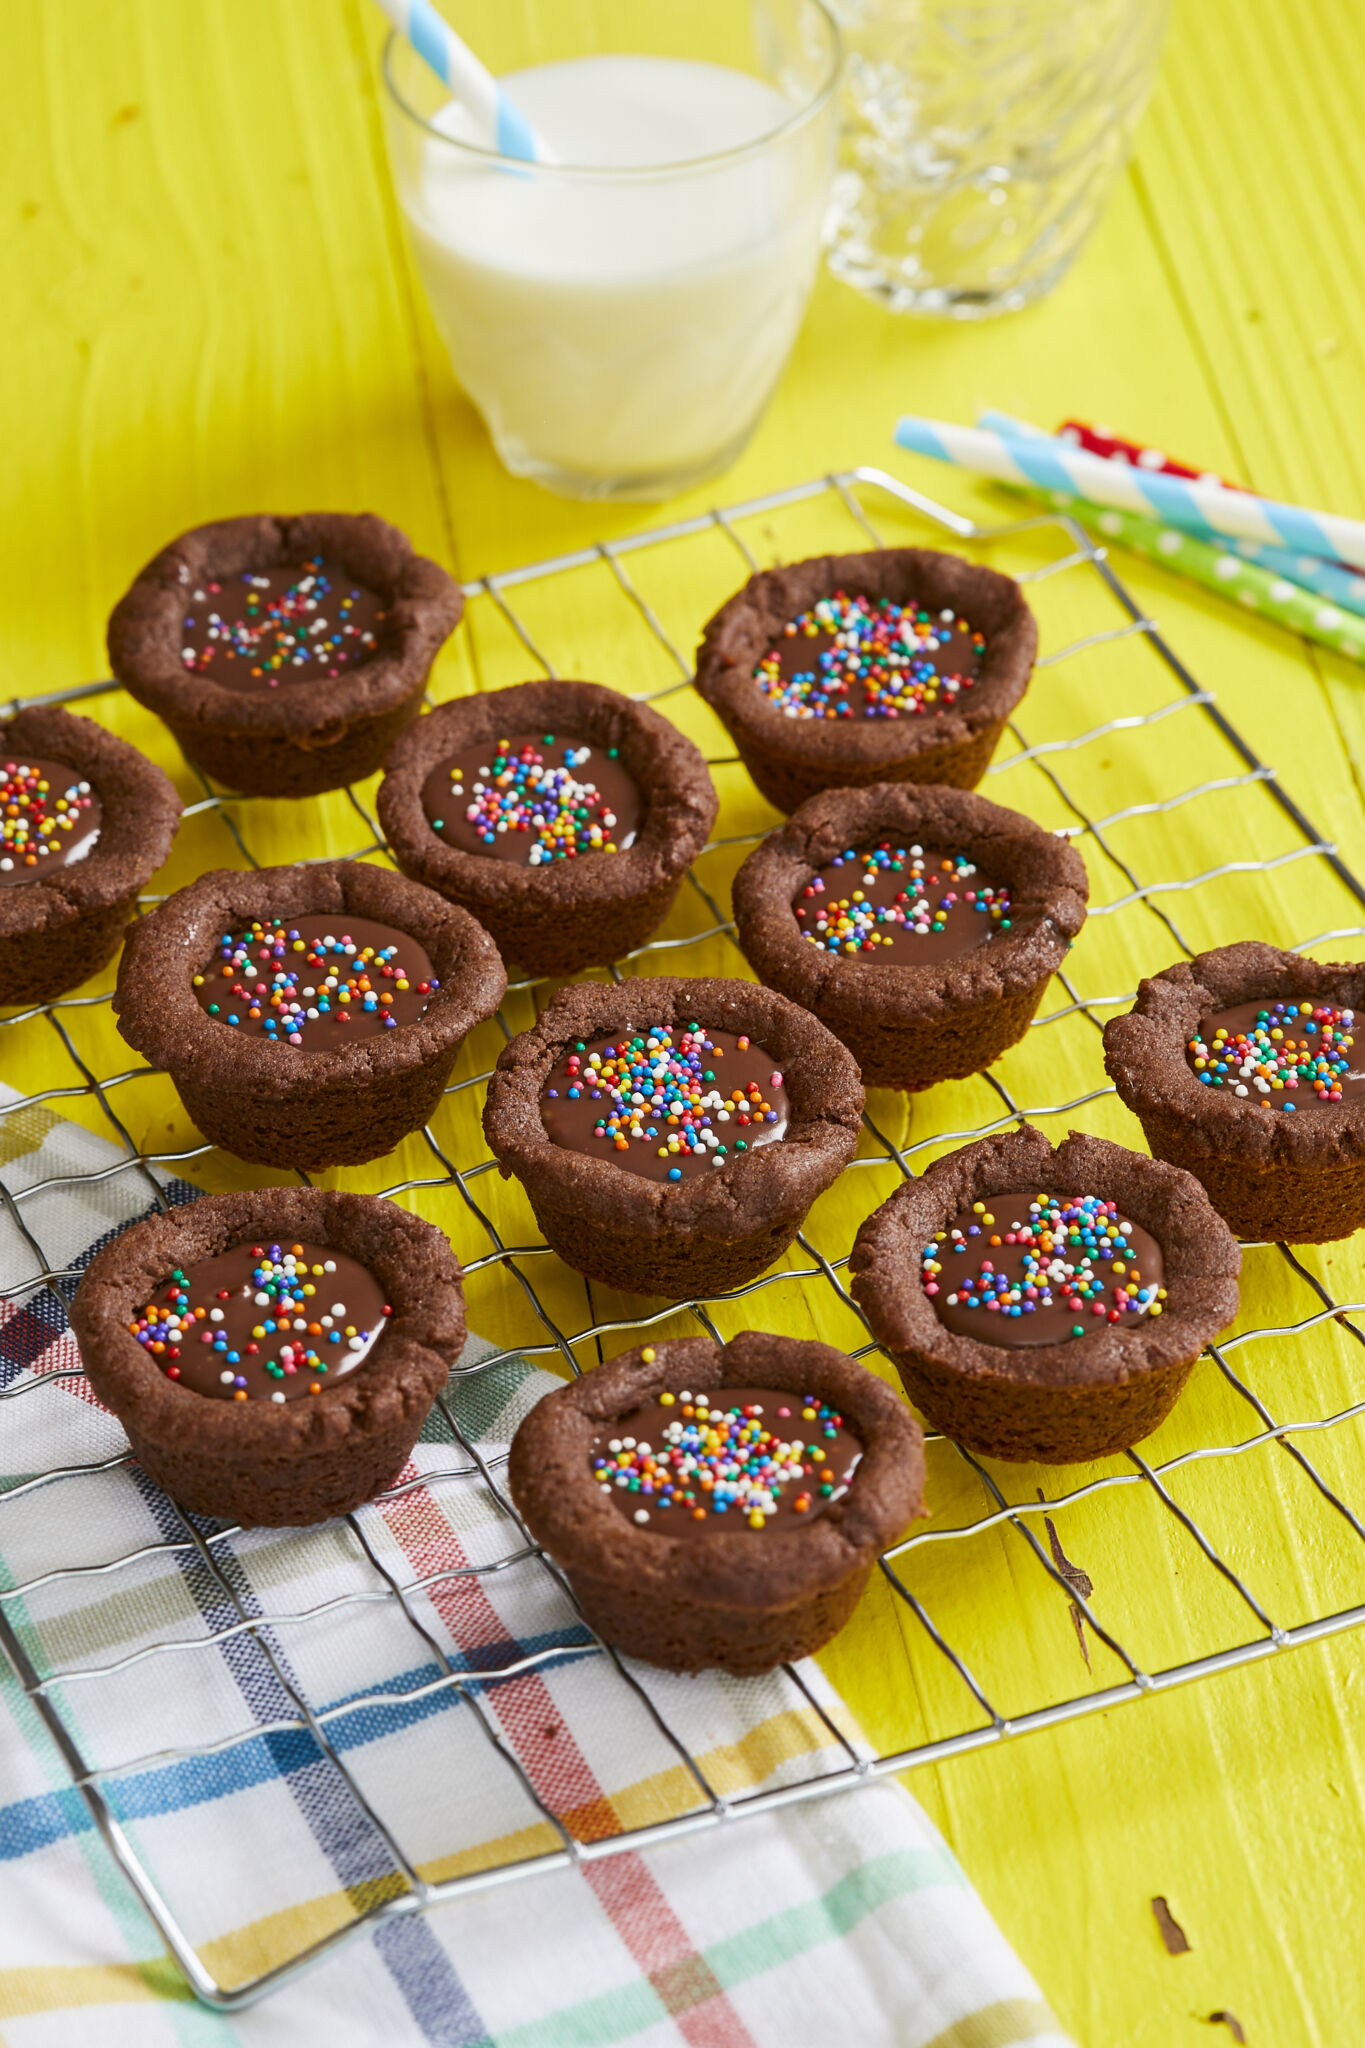 Bite-size Chocolate Cookie Cups are placed on a cooling rack. They are in signature chocolate brown color, have lightly crispy edges, soft and chewy inside with a silky ganache filling. They're decorated with colorful sprinkles. A glass cup of milk is served on the side. 